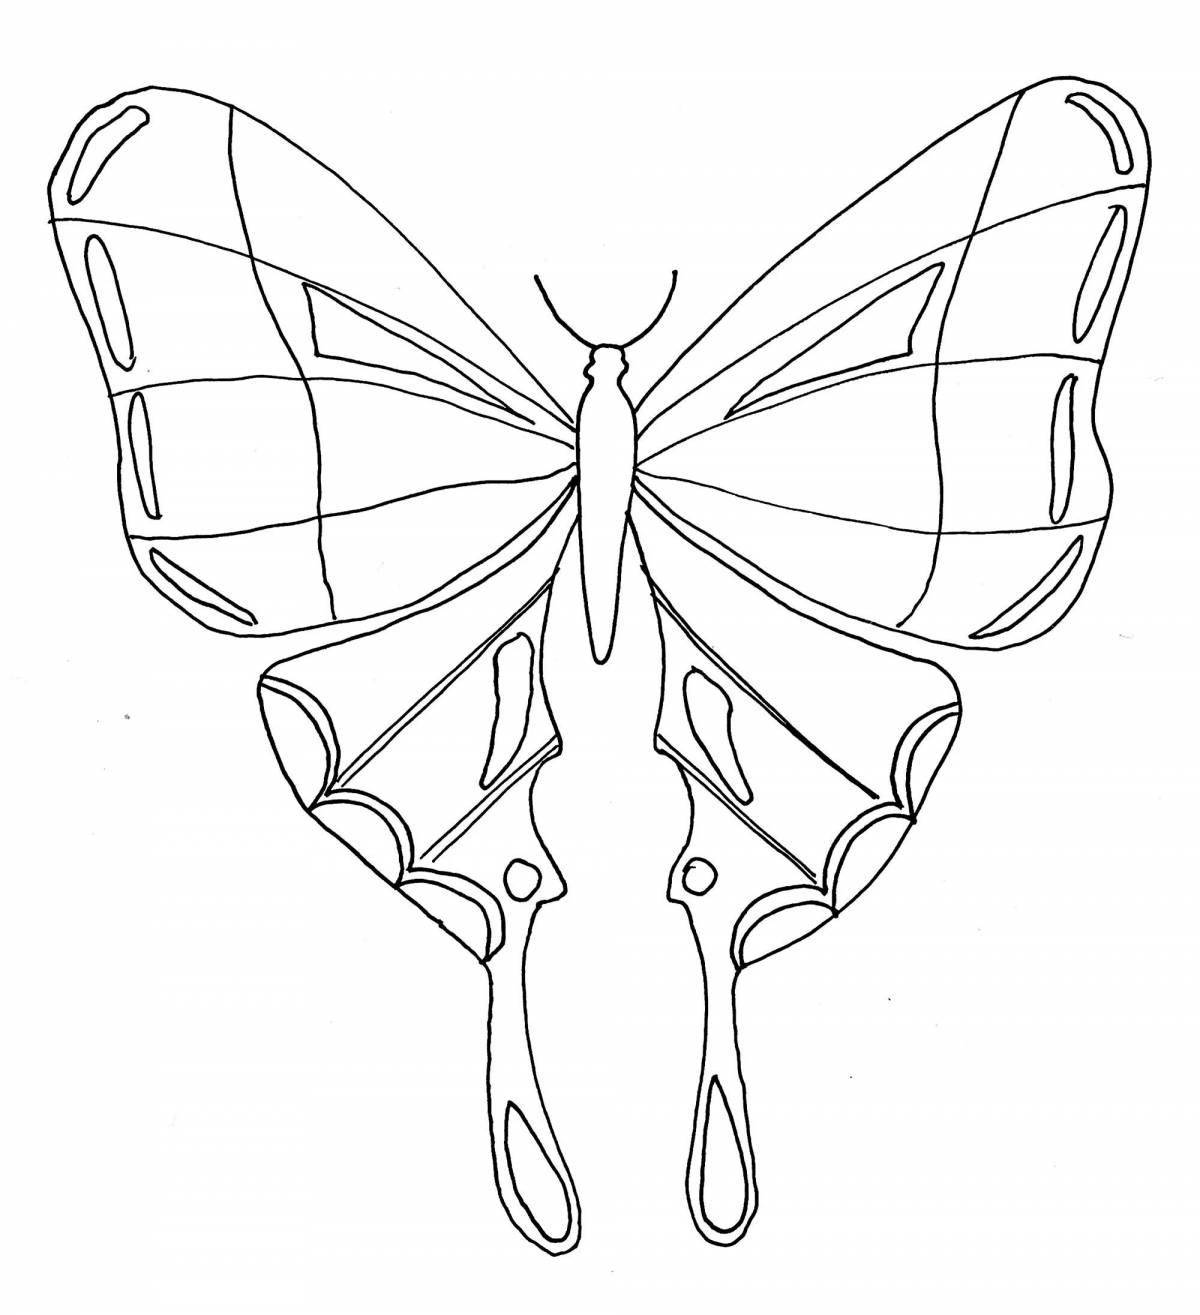 Exquisite outline of a butterfly coloring book